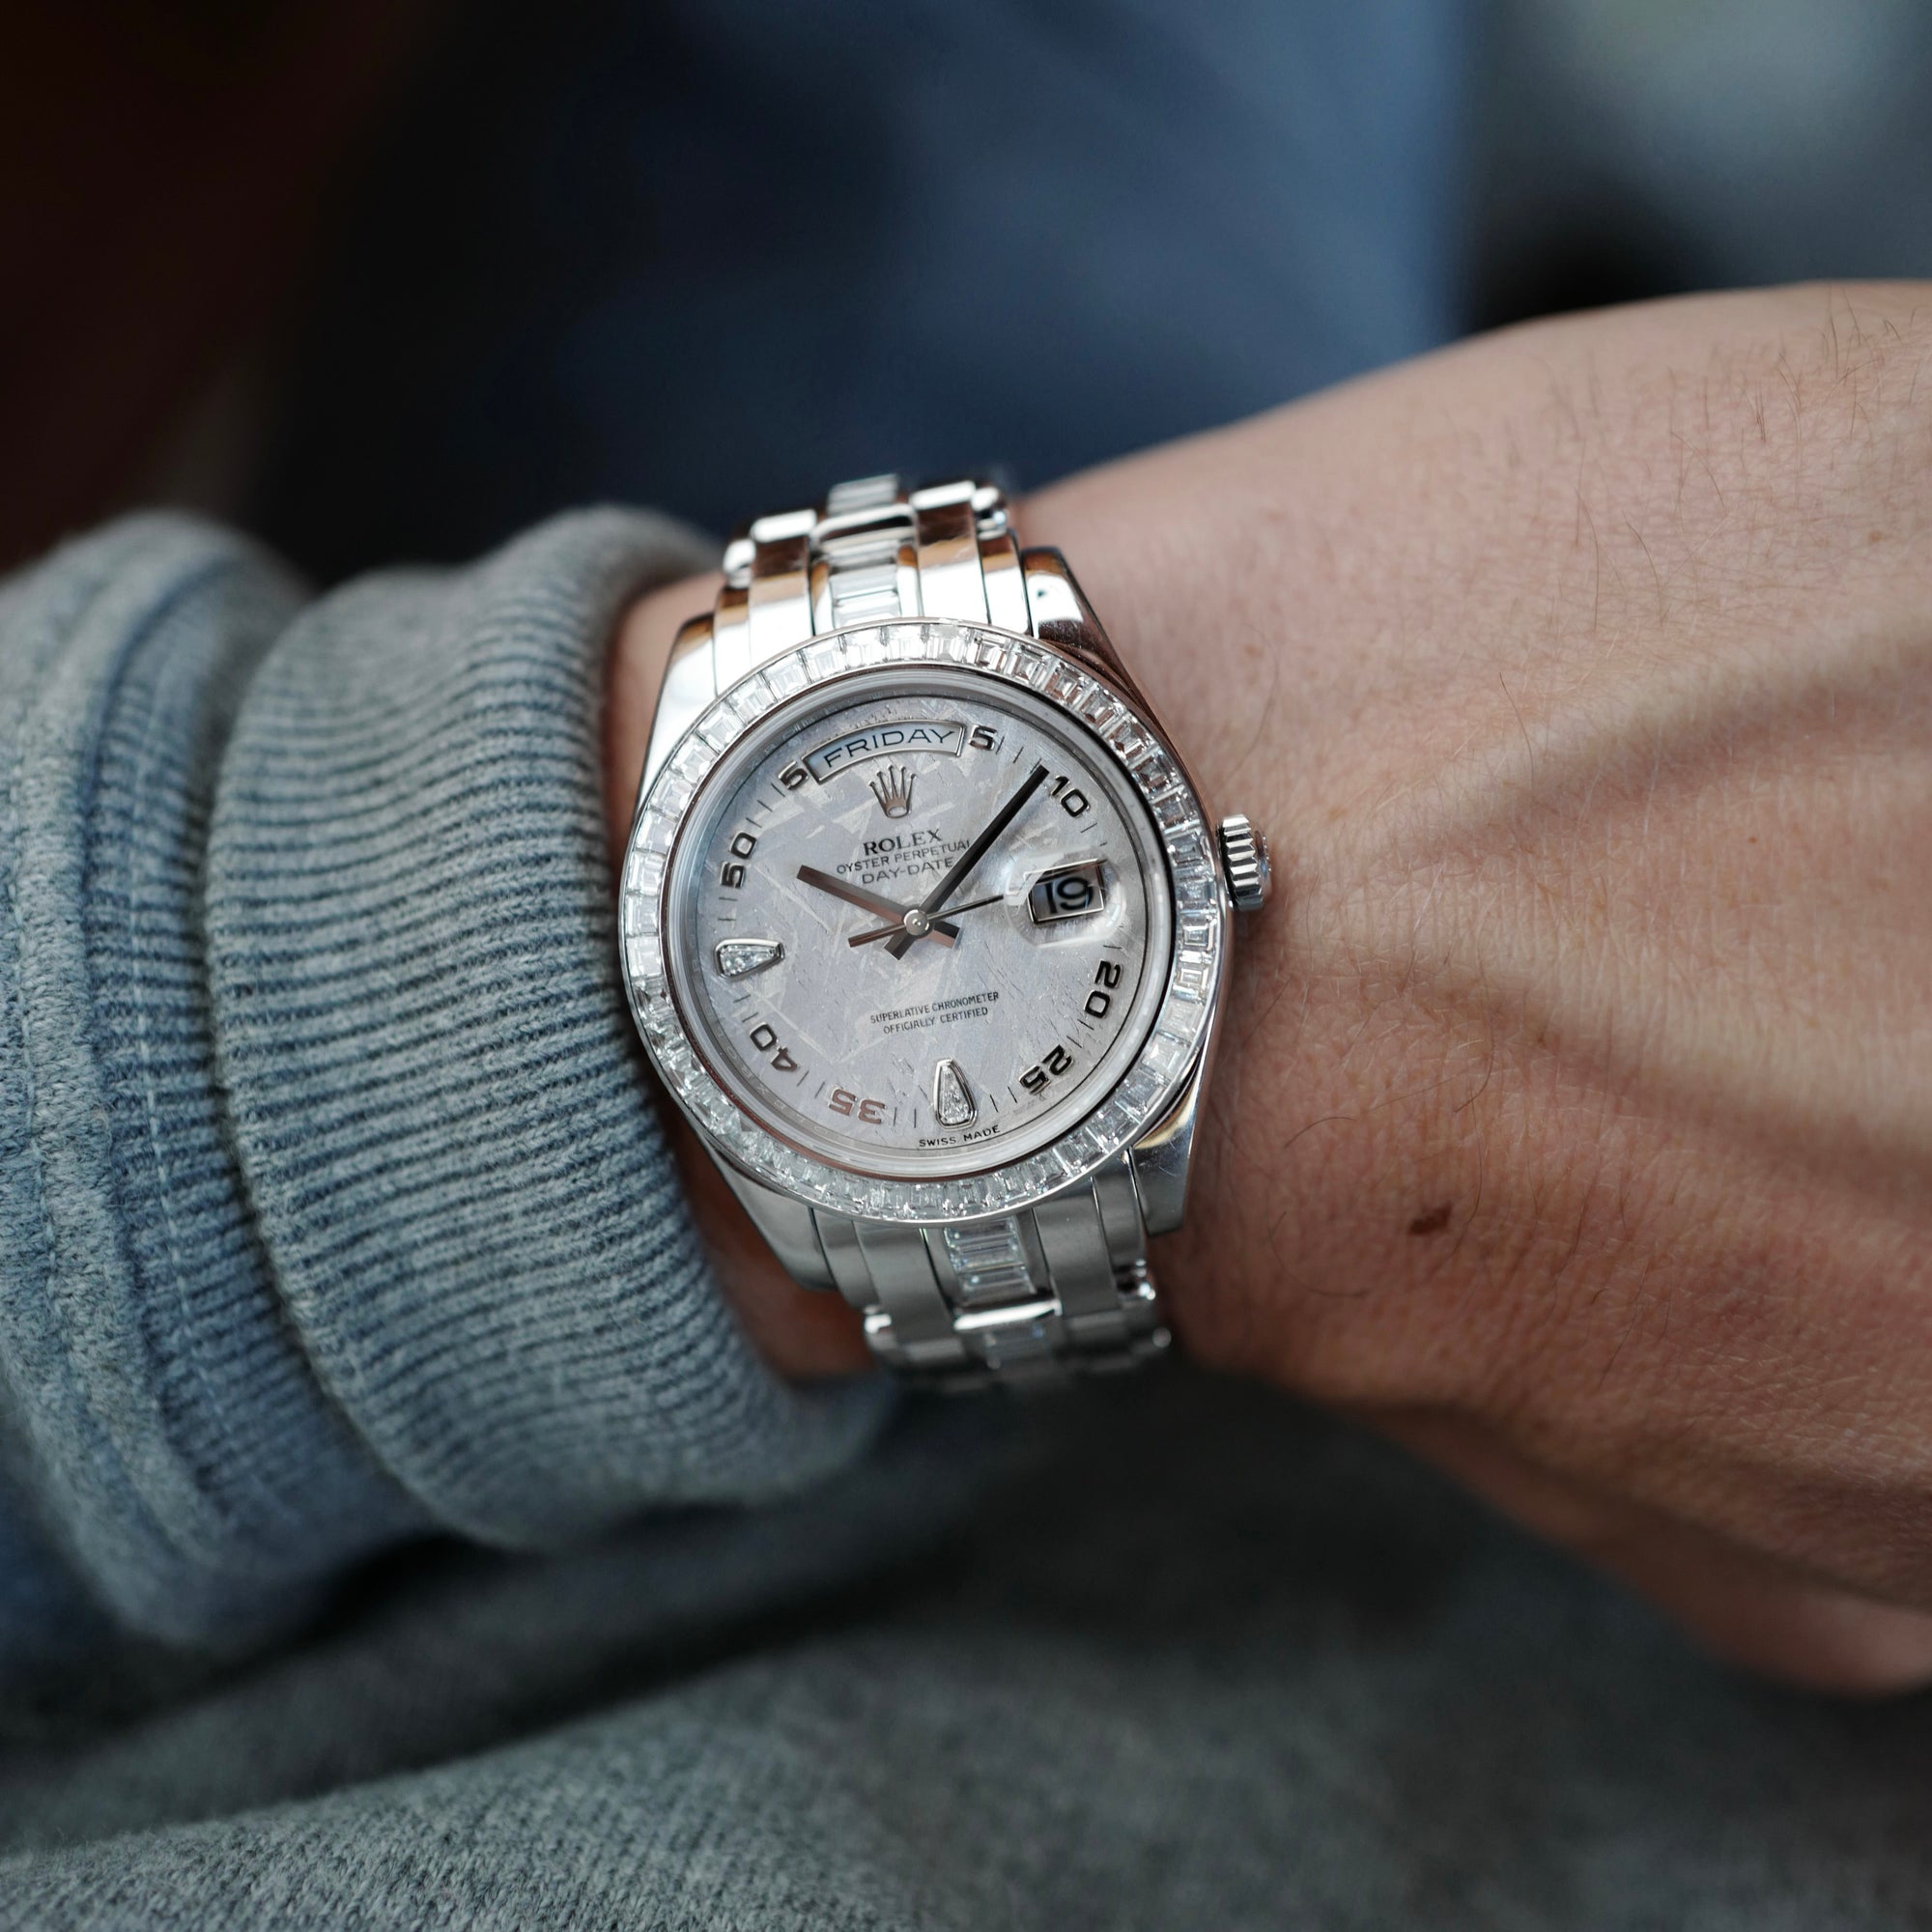 Rolex - Rolex Platinum and Diamond Day-Date Ref. 18956 (NEW ARRIVAL) - The Keystone Watches